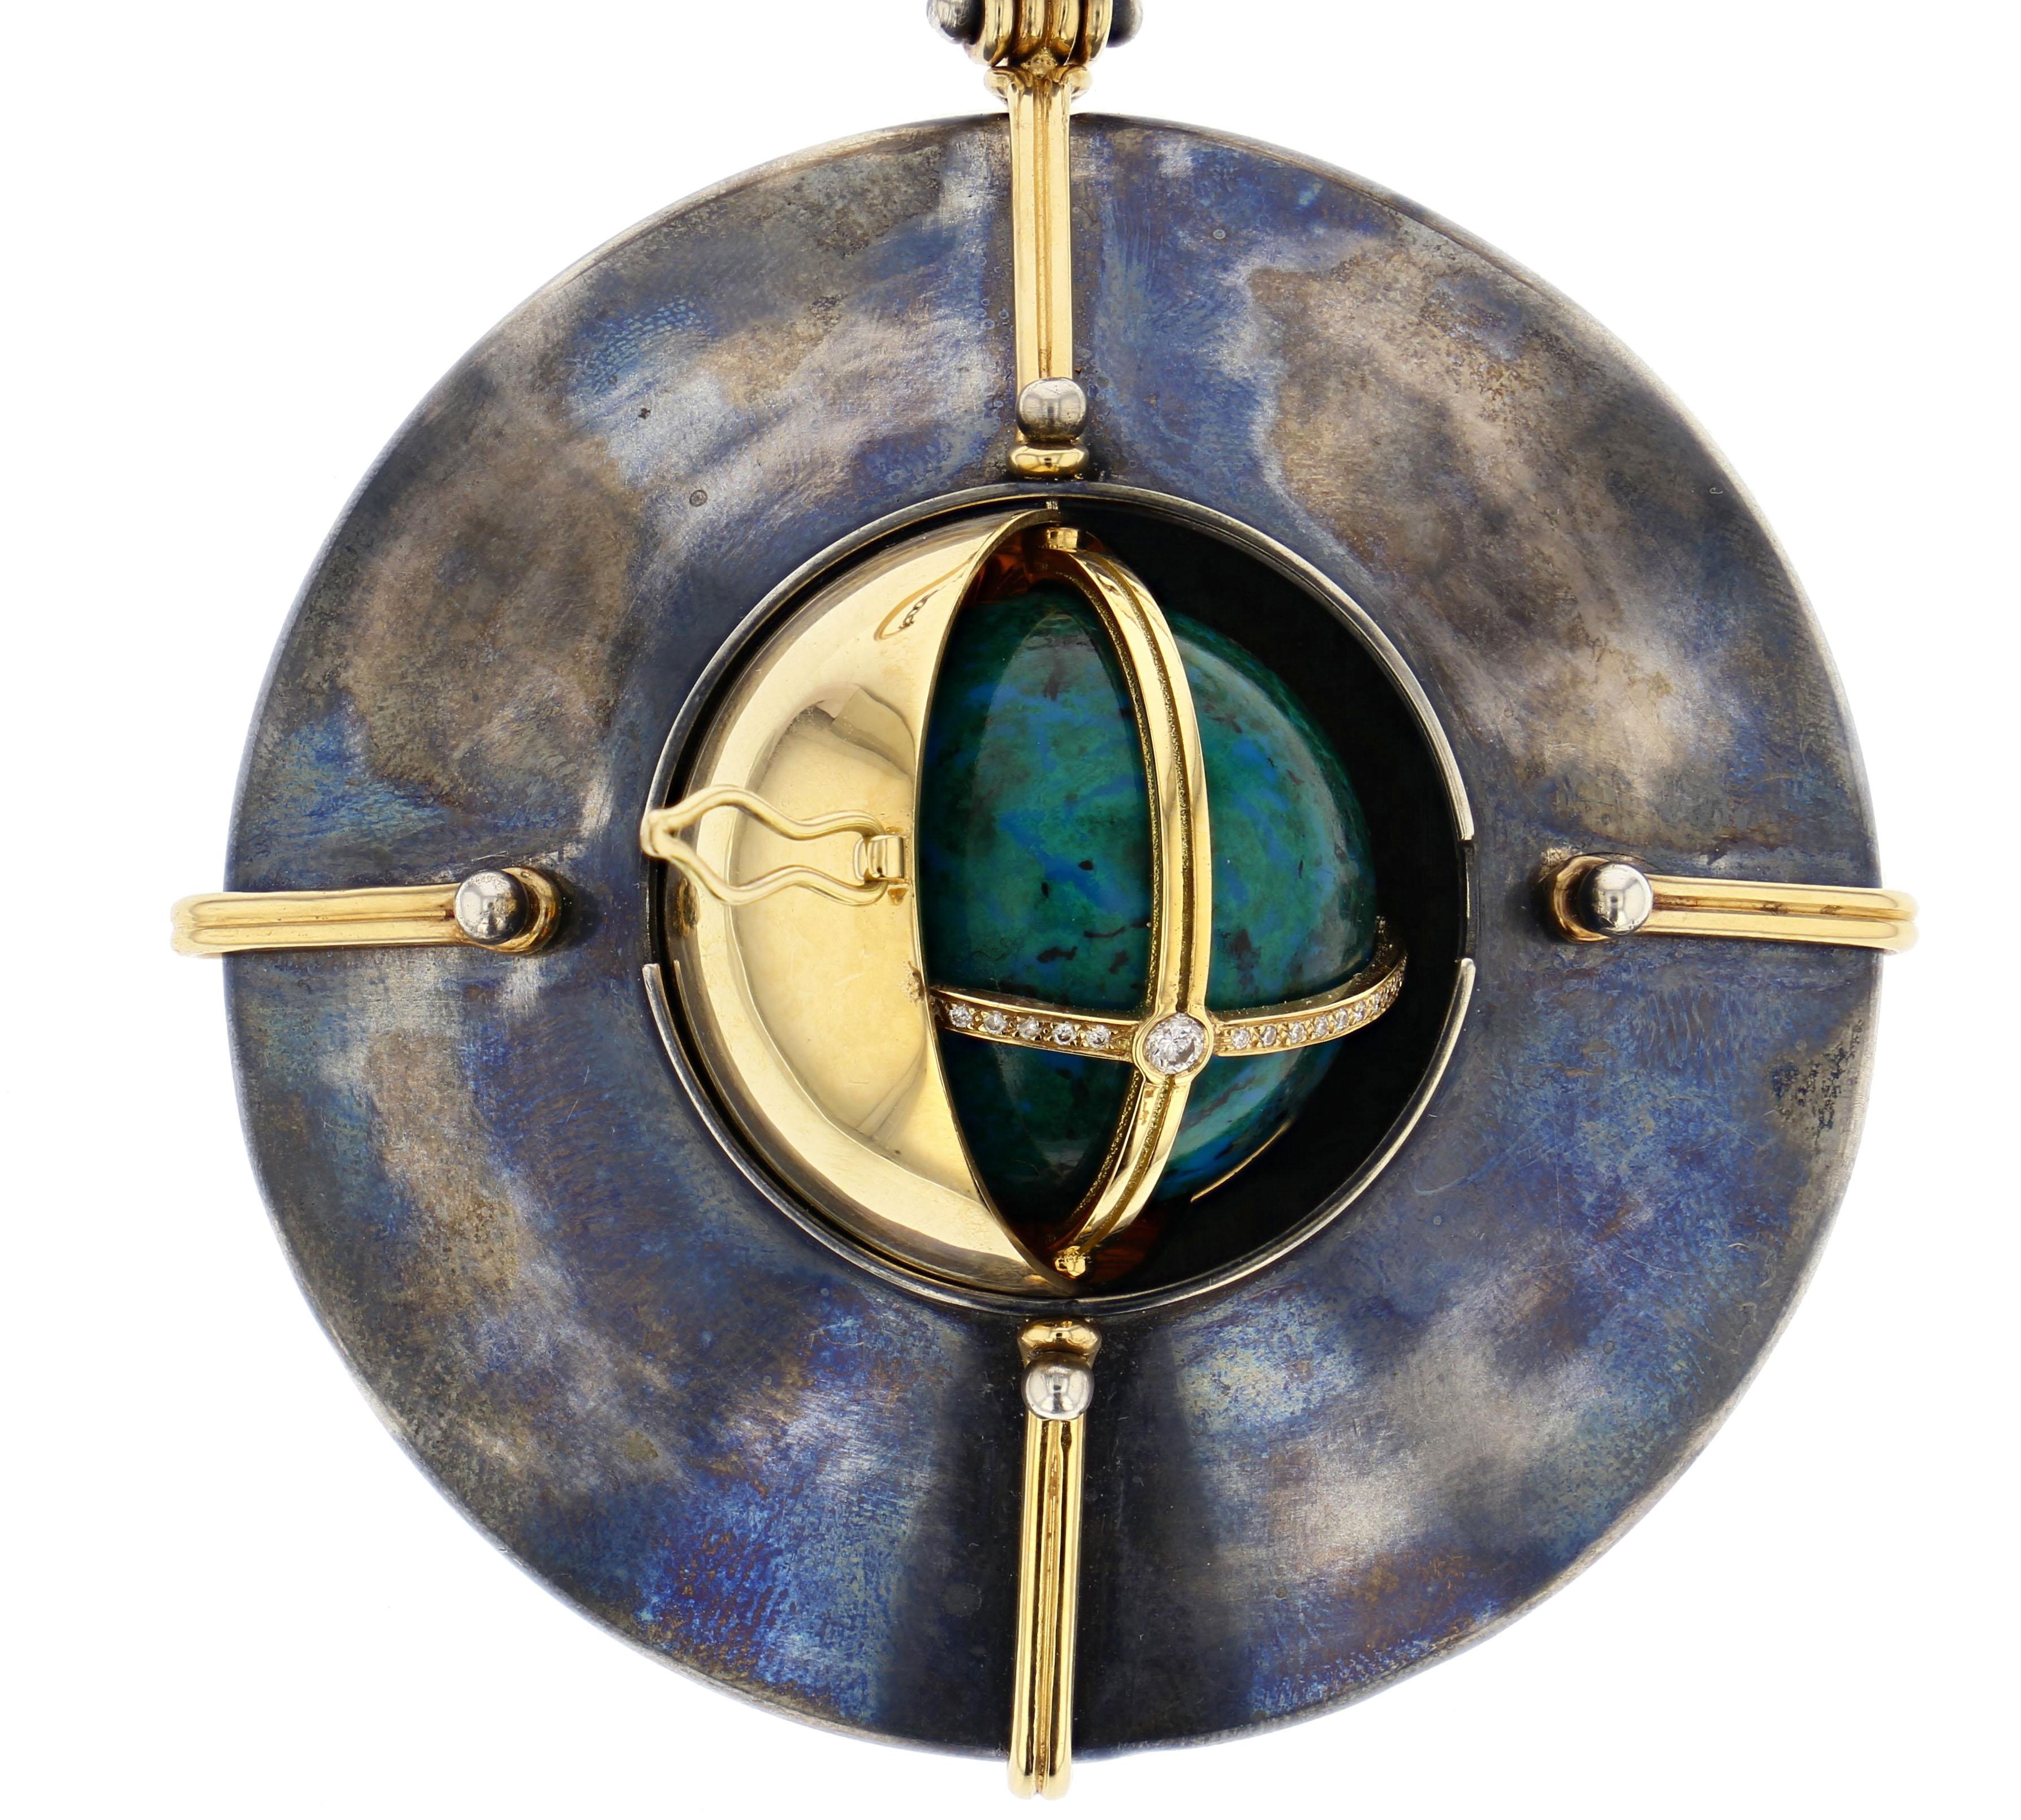 Neoclassical Scaphandre Pendant Chrysocolla by Elie Top